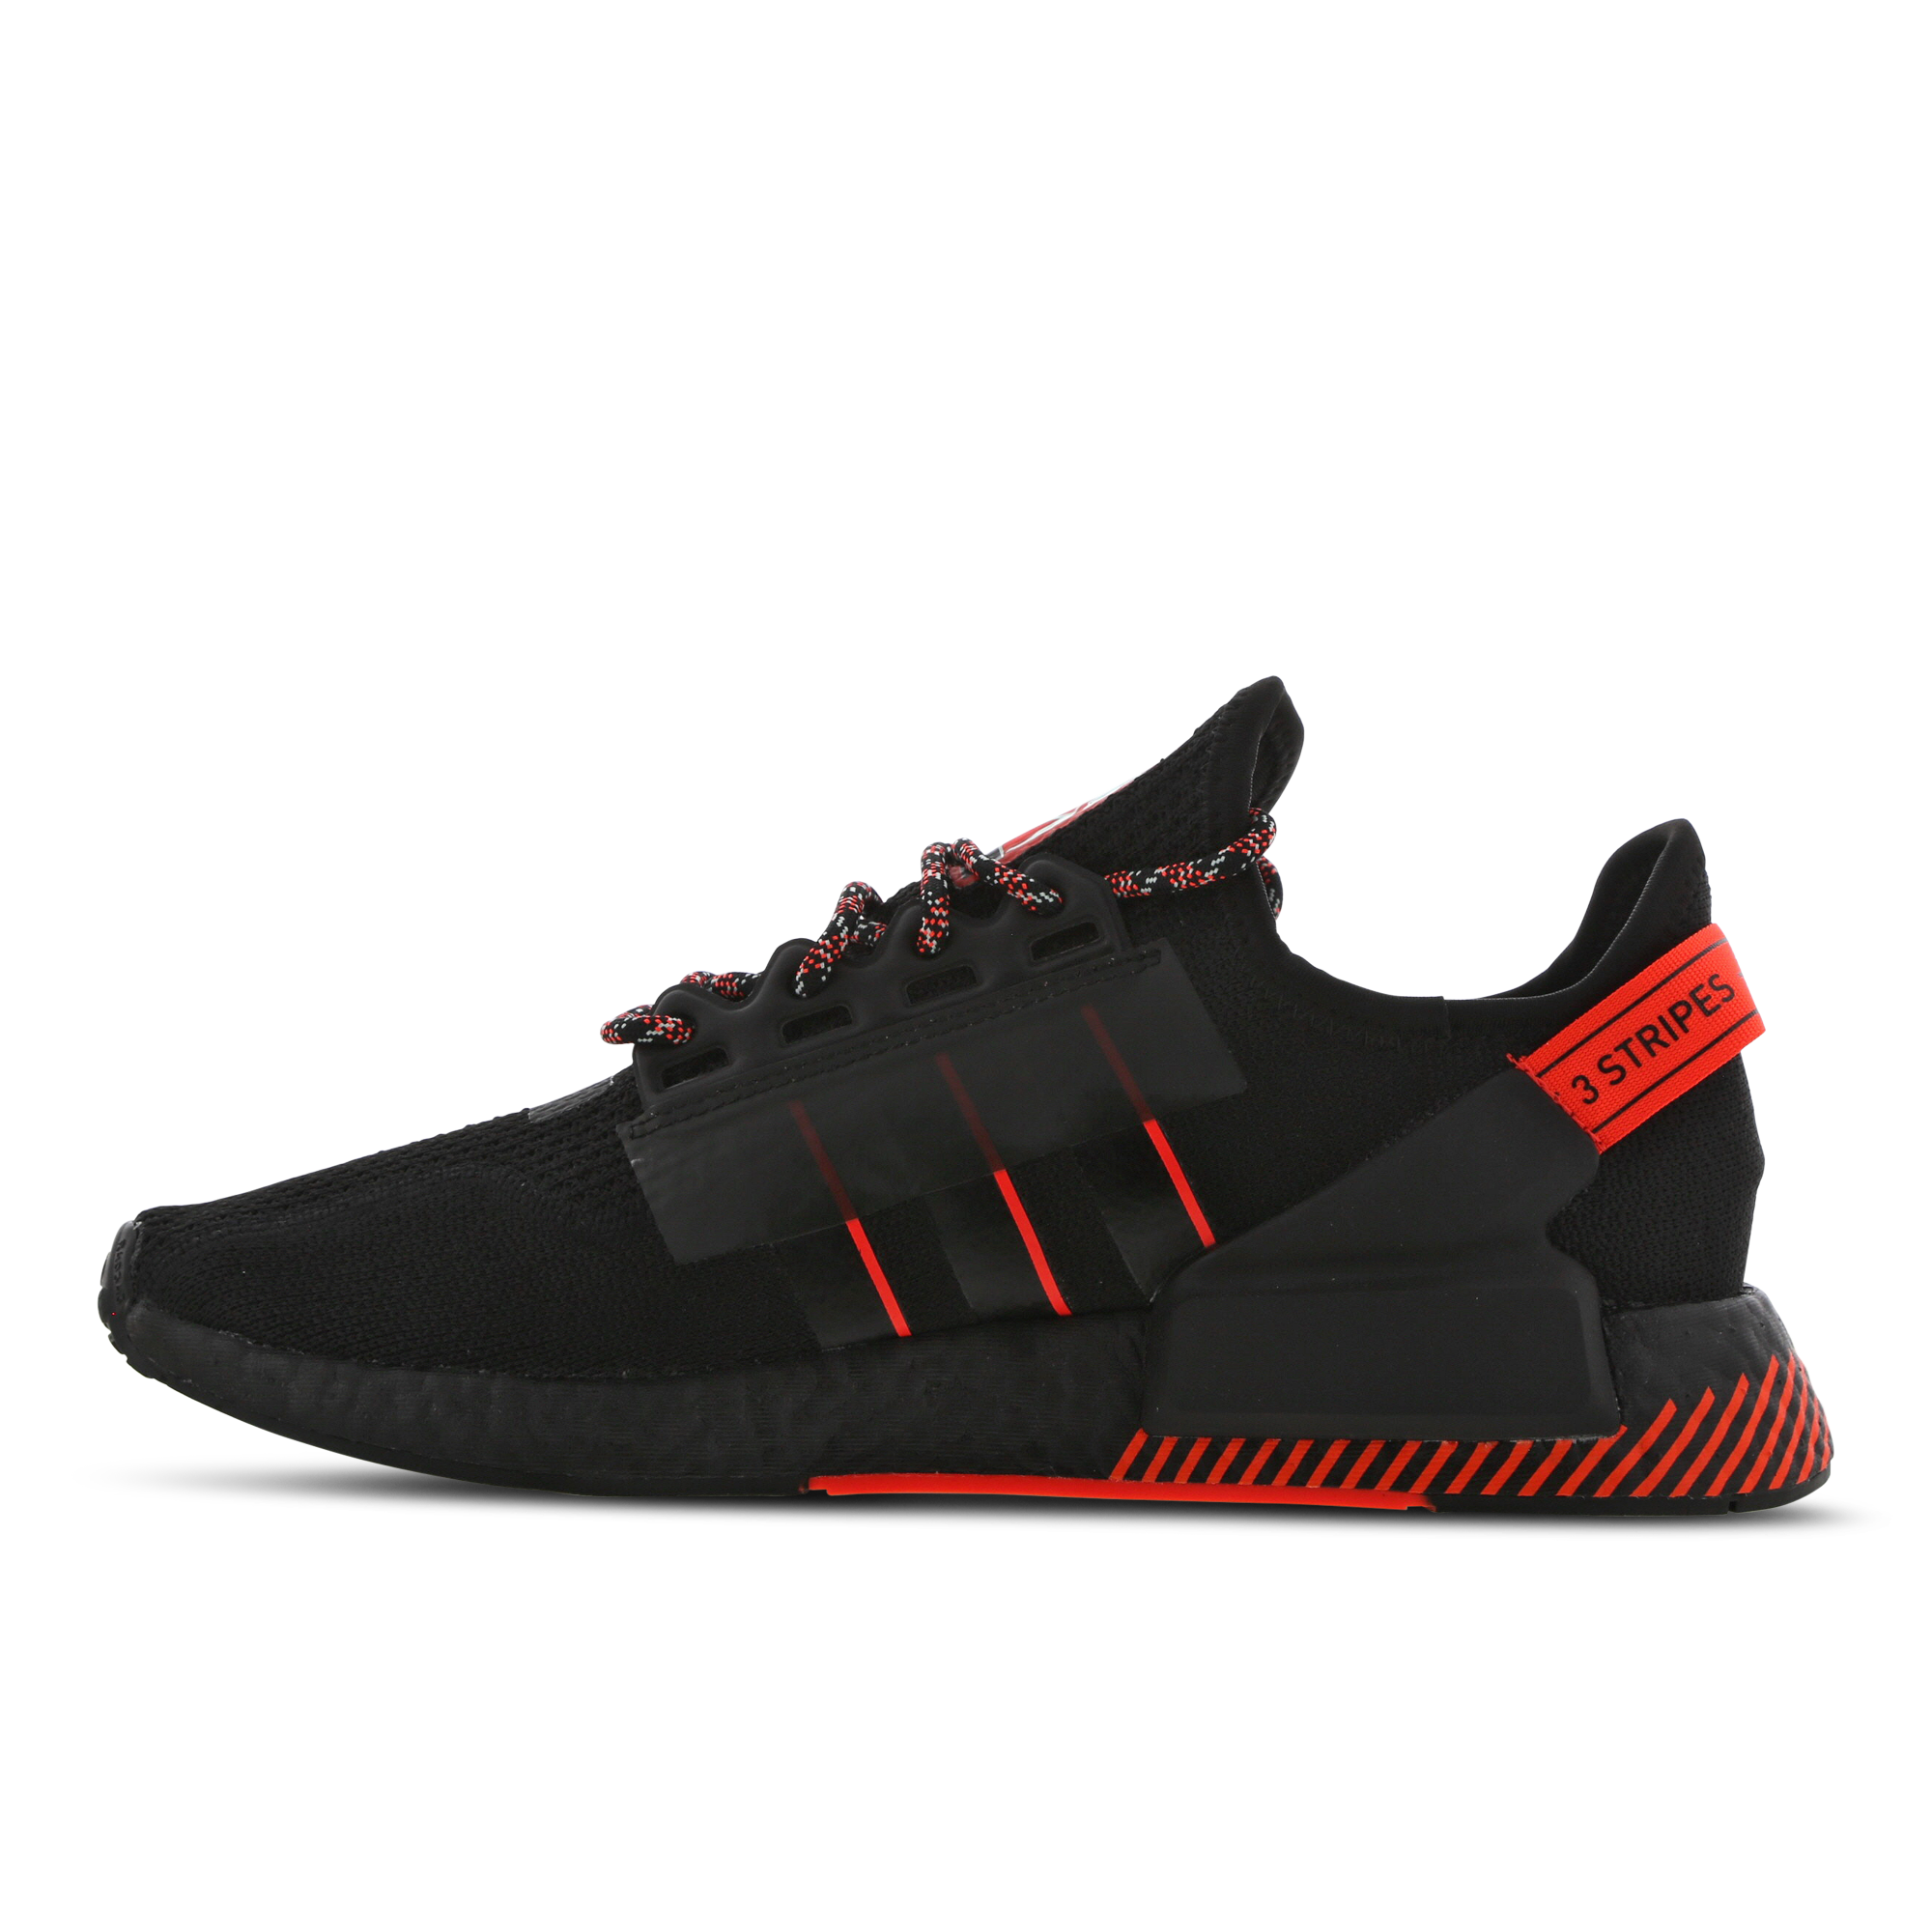 adidas NMD r1 v2 mexico city 01 Sneakers